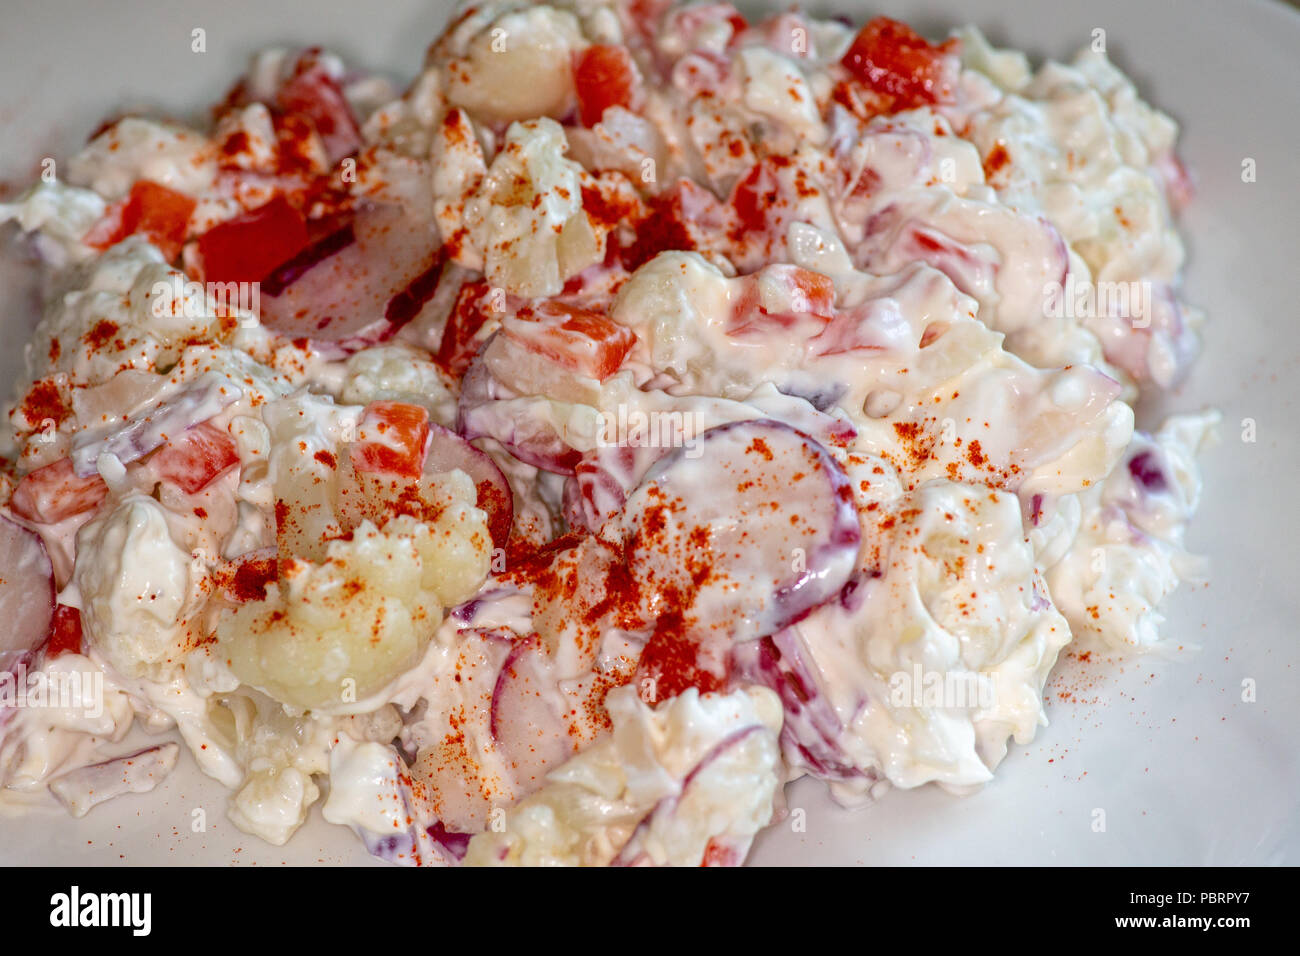 Cauliflower Smash a potato salad substitute that is low carb and good for those on the Keto Diet. Made of Cauliflower, radishes, sweet onions and red Stock Photo